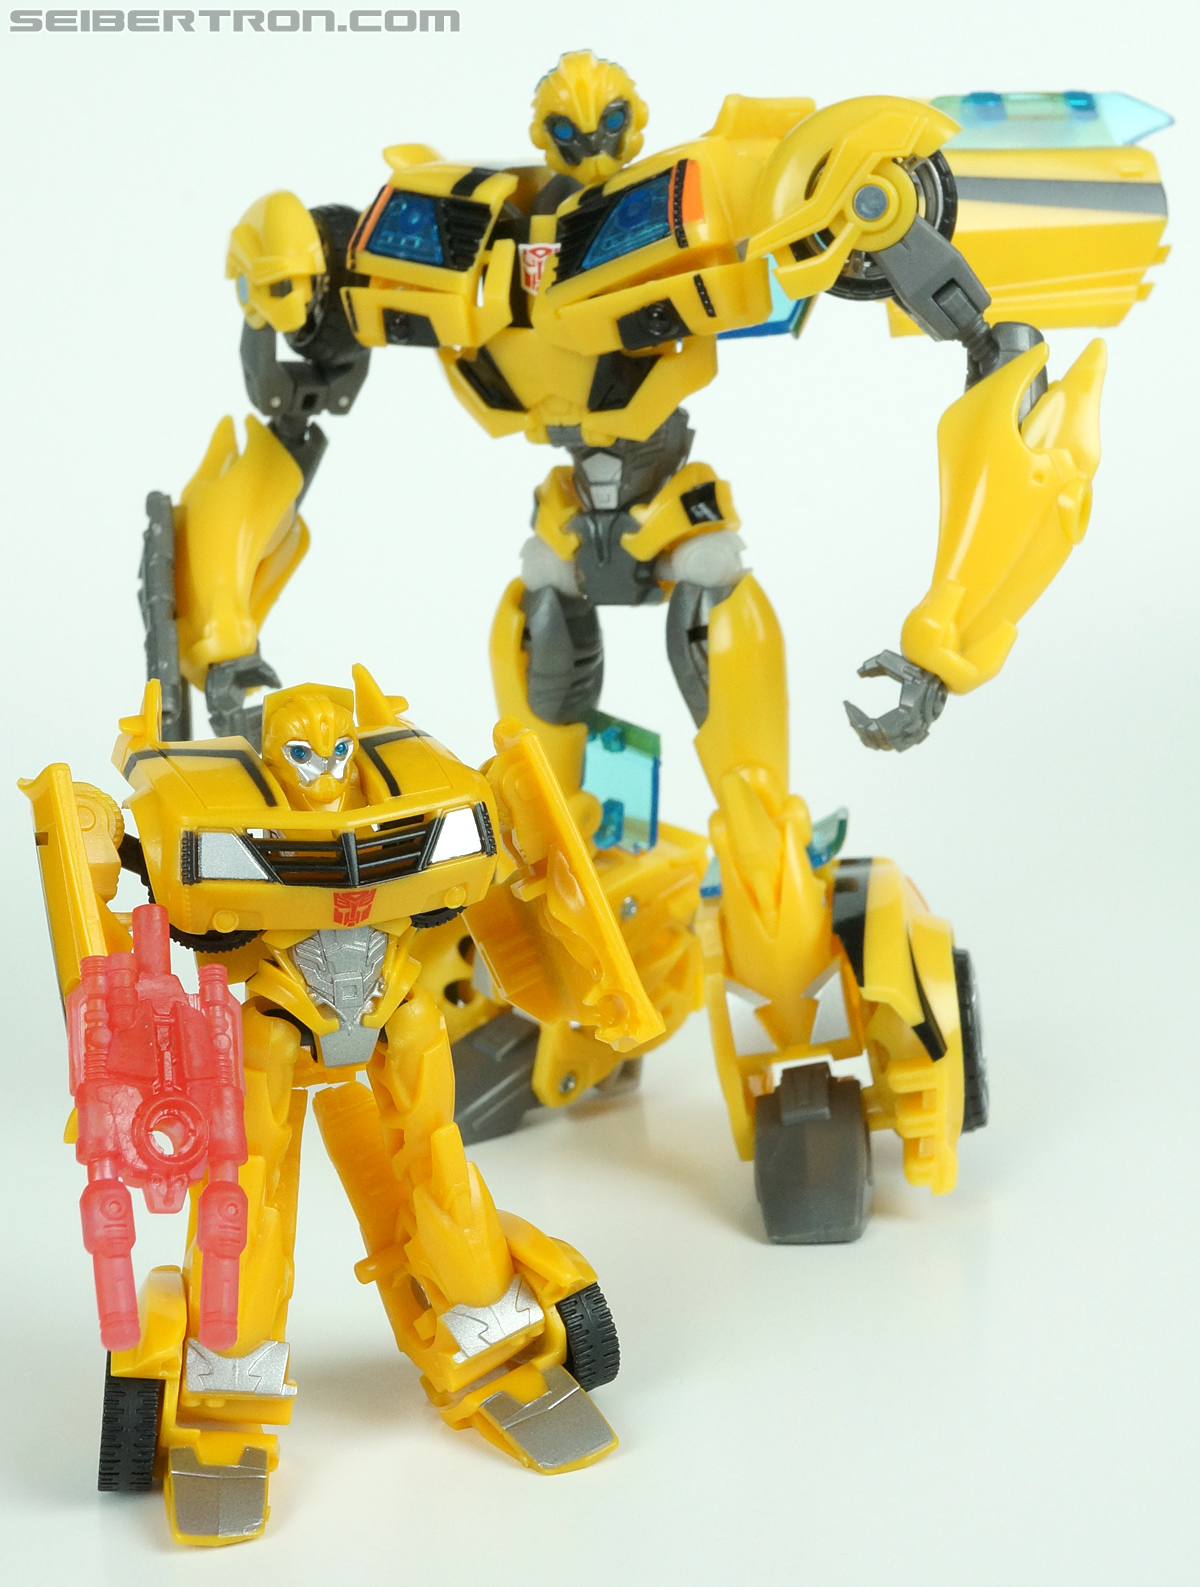 Transformers Prime: Cyberverse Bumblebee (Image #104 of 110)